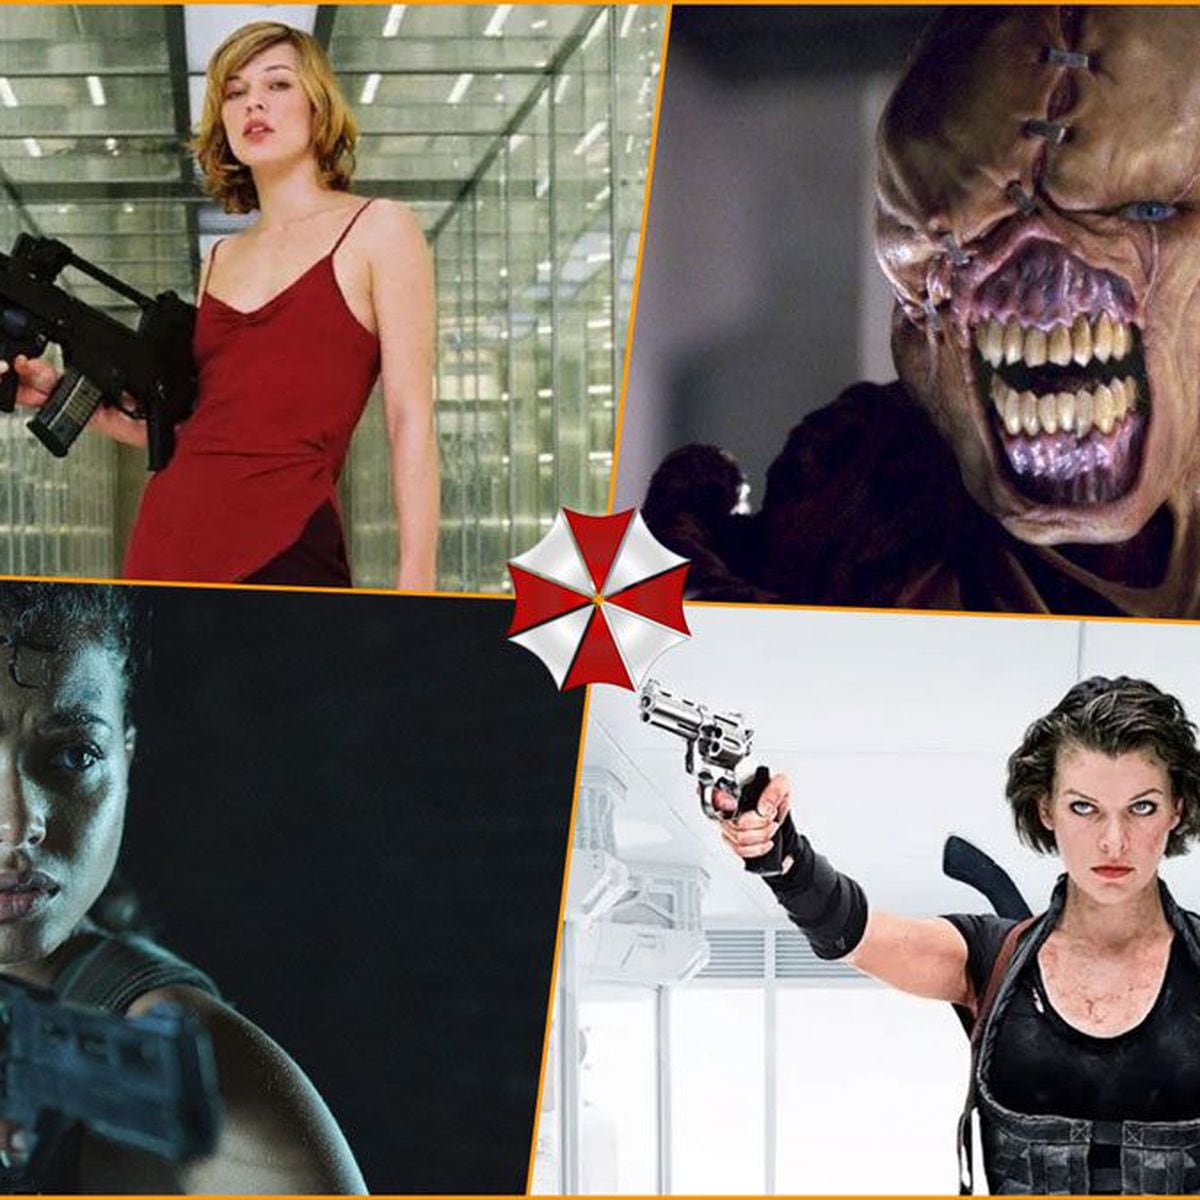 How to watch all 'Resident Evil' movies and shows in chronological order